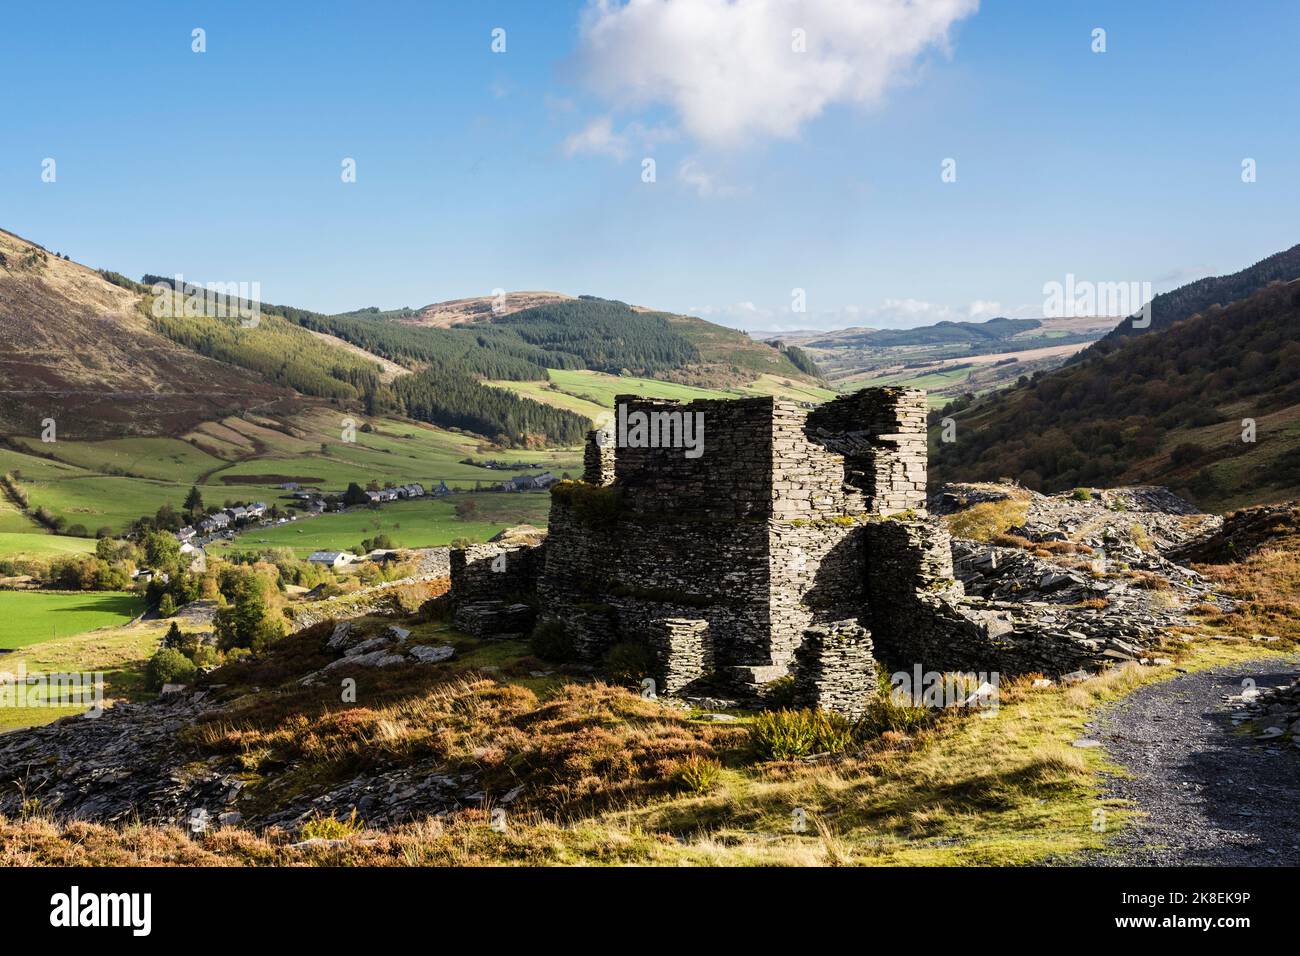 Old ruined building in disused Rhiw Fachno quarry with slate Trail track. Cwm Penmachno, Betws-y-Coed, Conwy, north Wales, UK, Britain Stock Photo